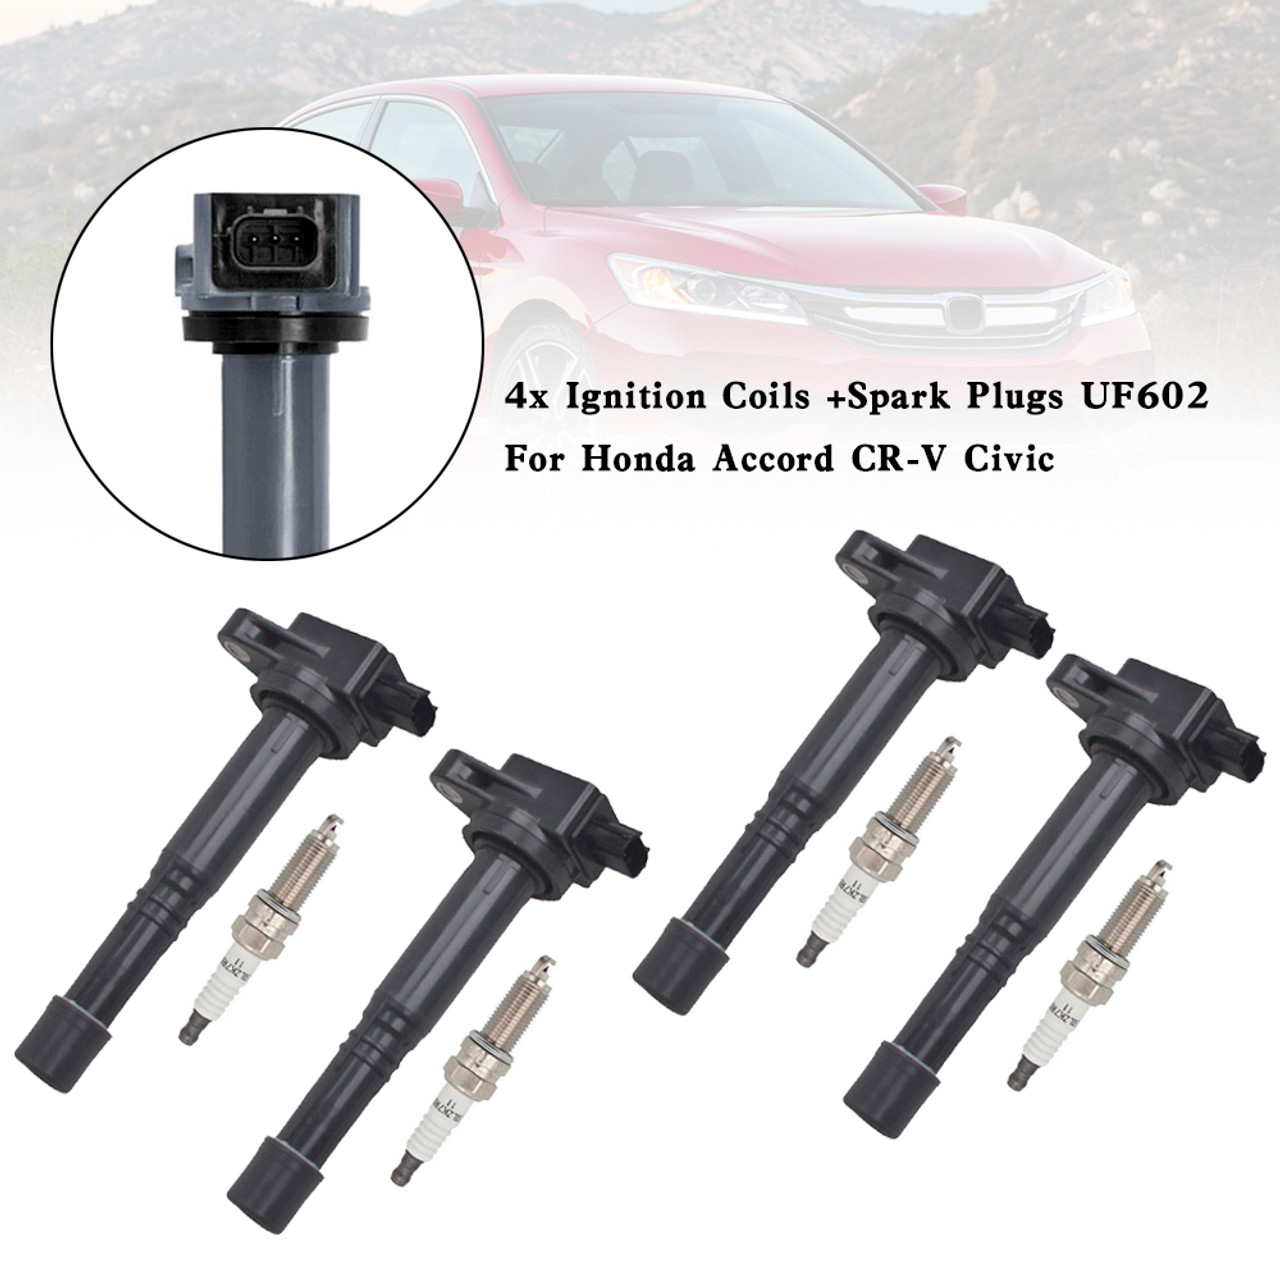 4x Ignition Coils +Spark Plugs UF602 For Honda Accord CR-V Civic